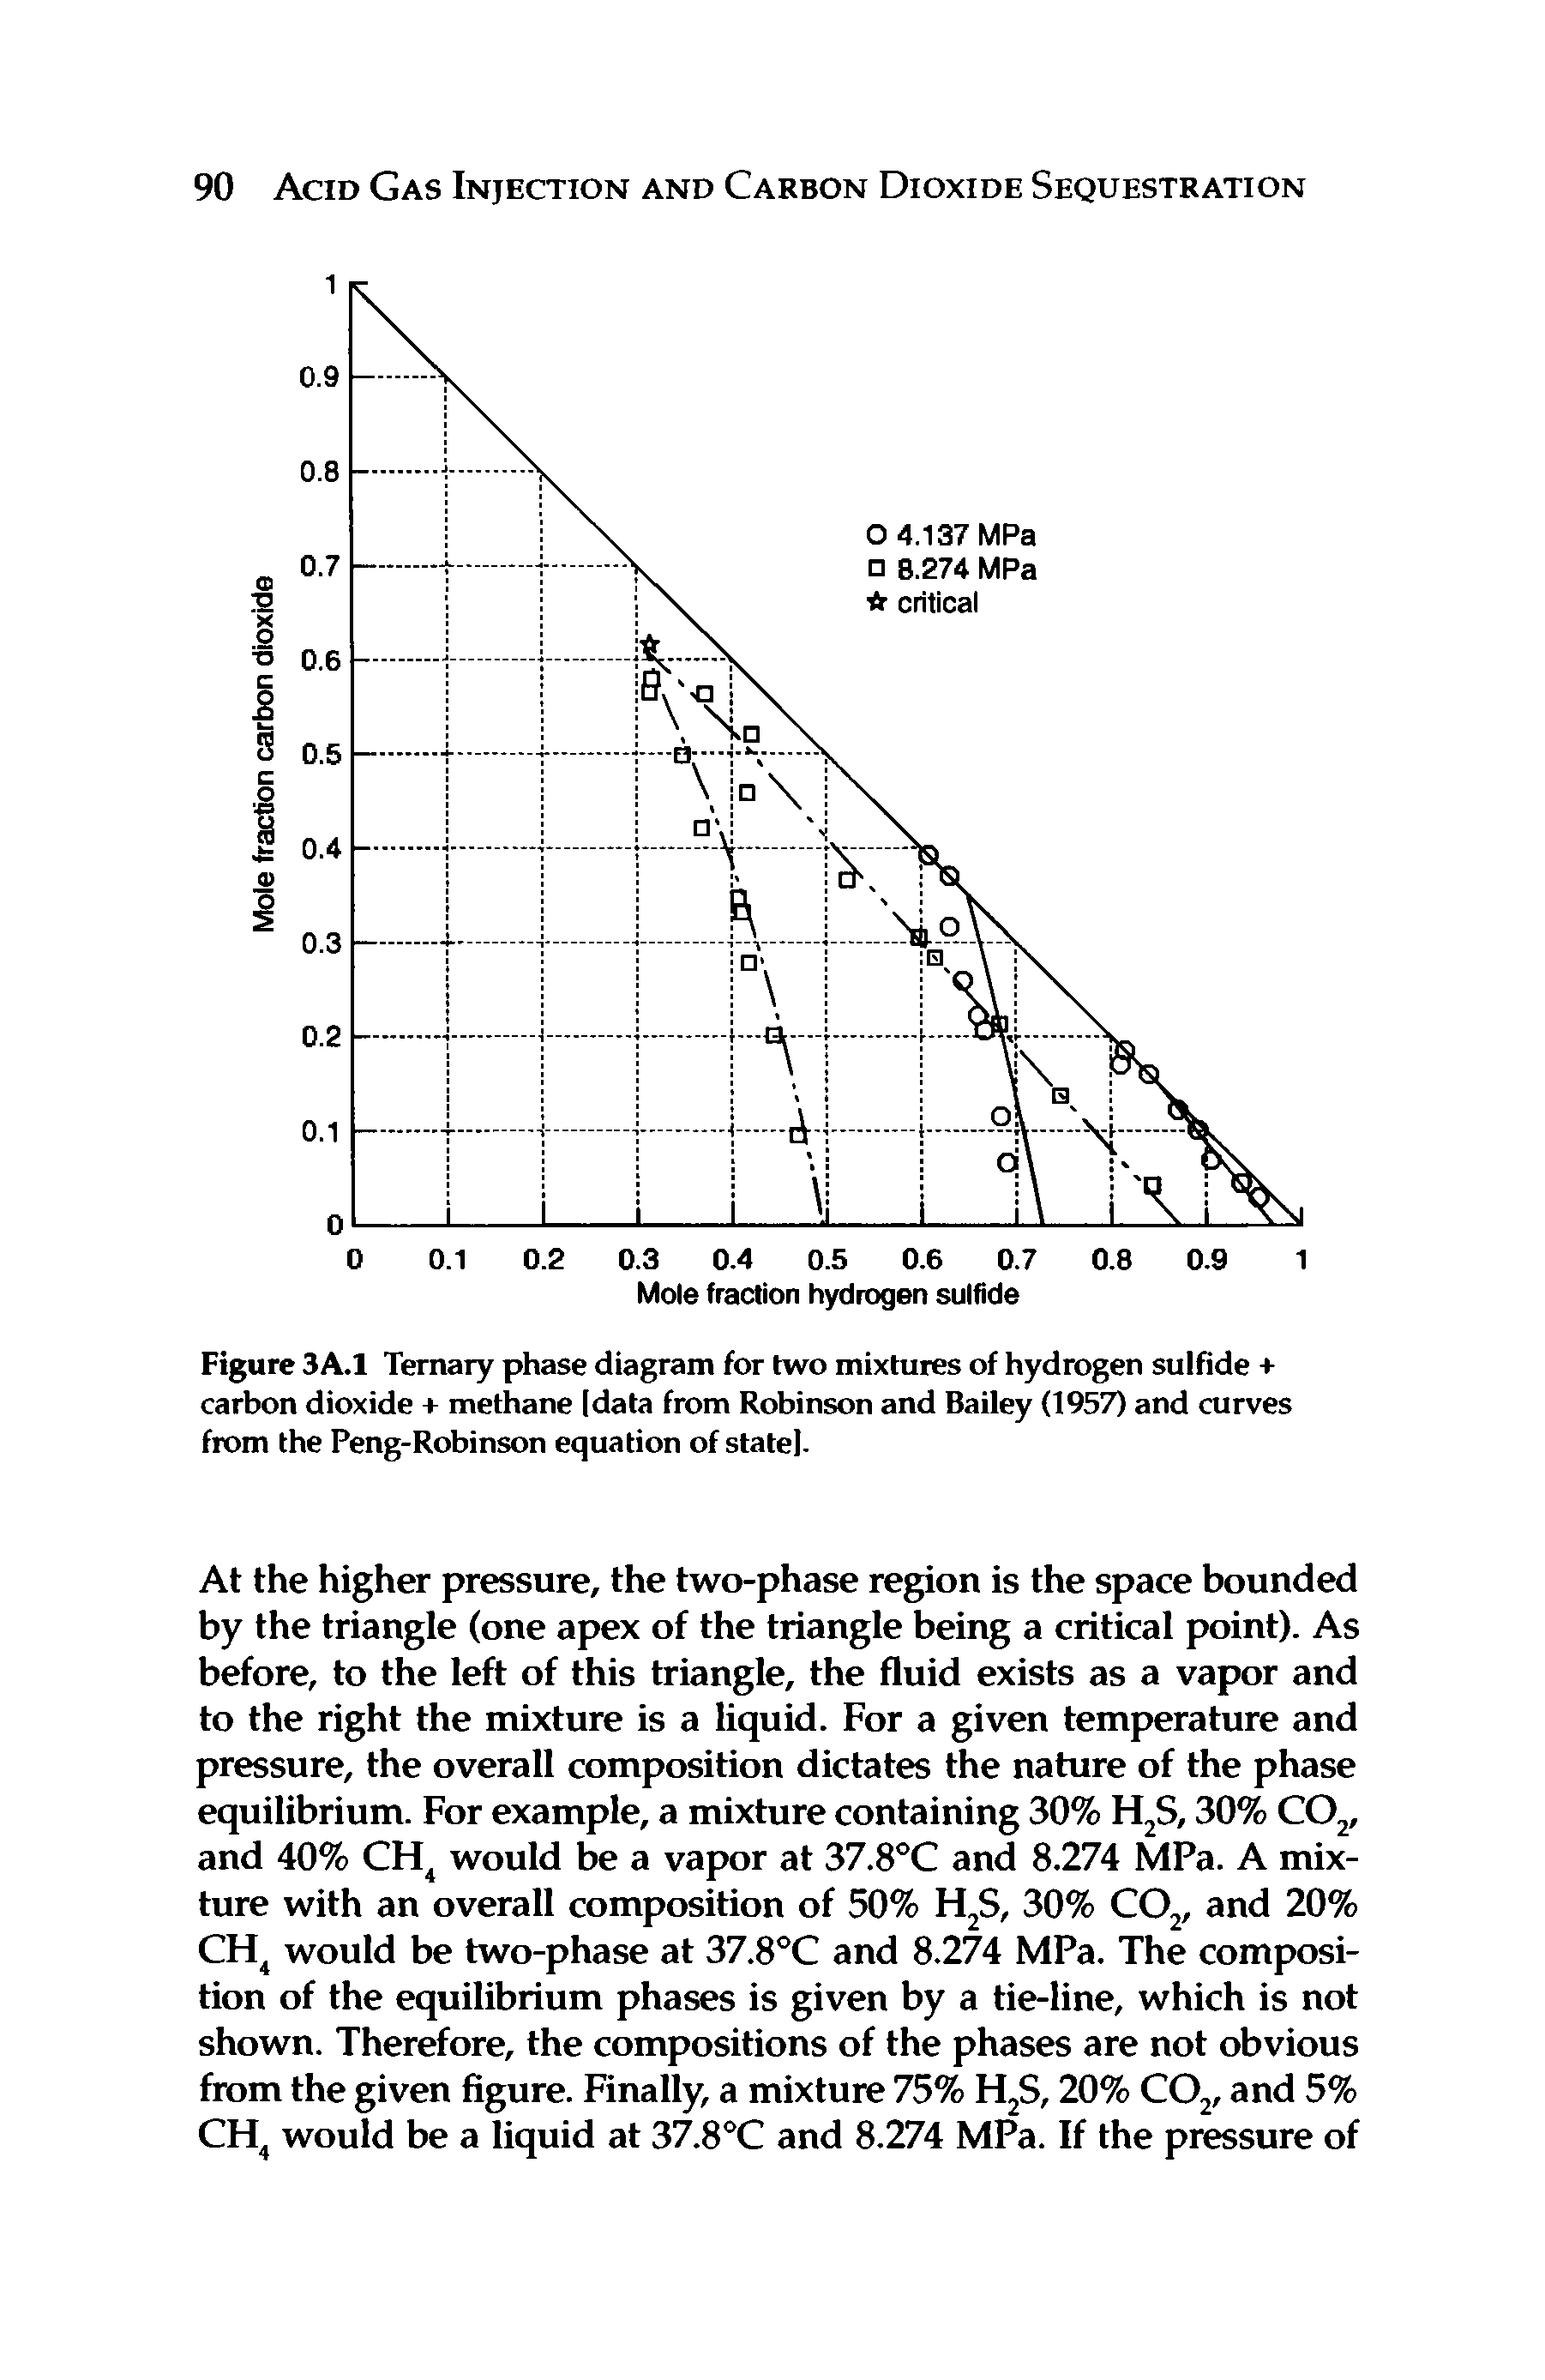 Figure 3A.1 Ternary phase diagram for two mixtures of hydrogen sulfide + carbon dioxide + methane [data from Robinson and Bailey (1957) and curves from the Peng-Robinson equation of state].